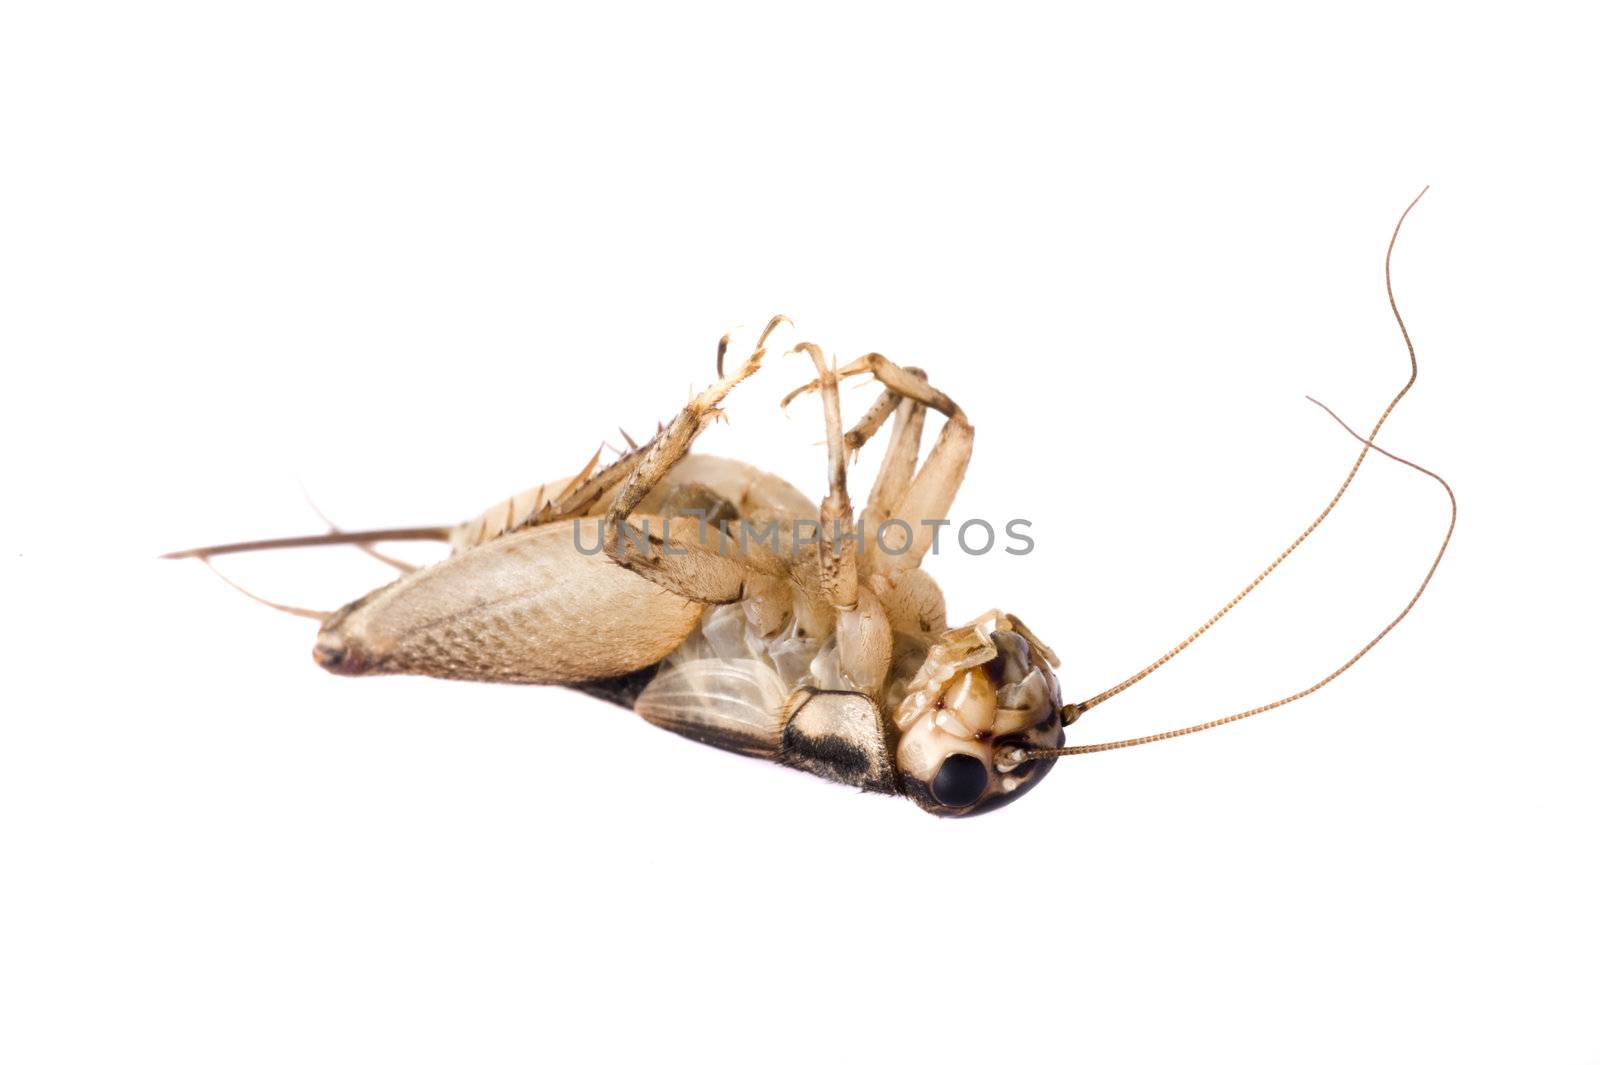 Dead Common House Cricket (Acheta domesticus) isolated on a white background